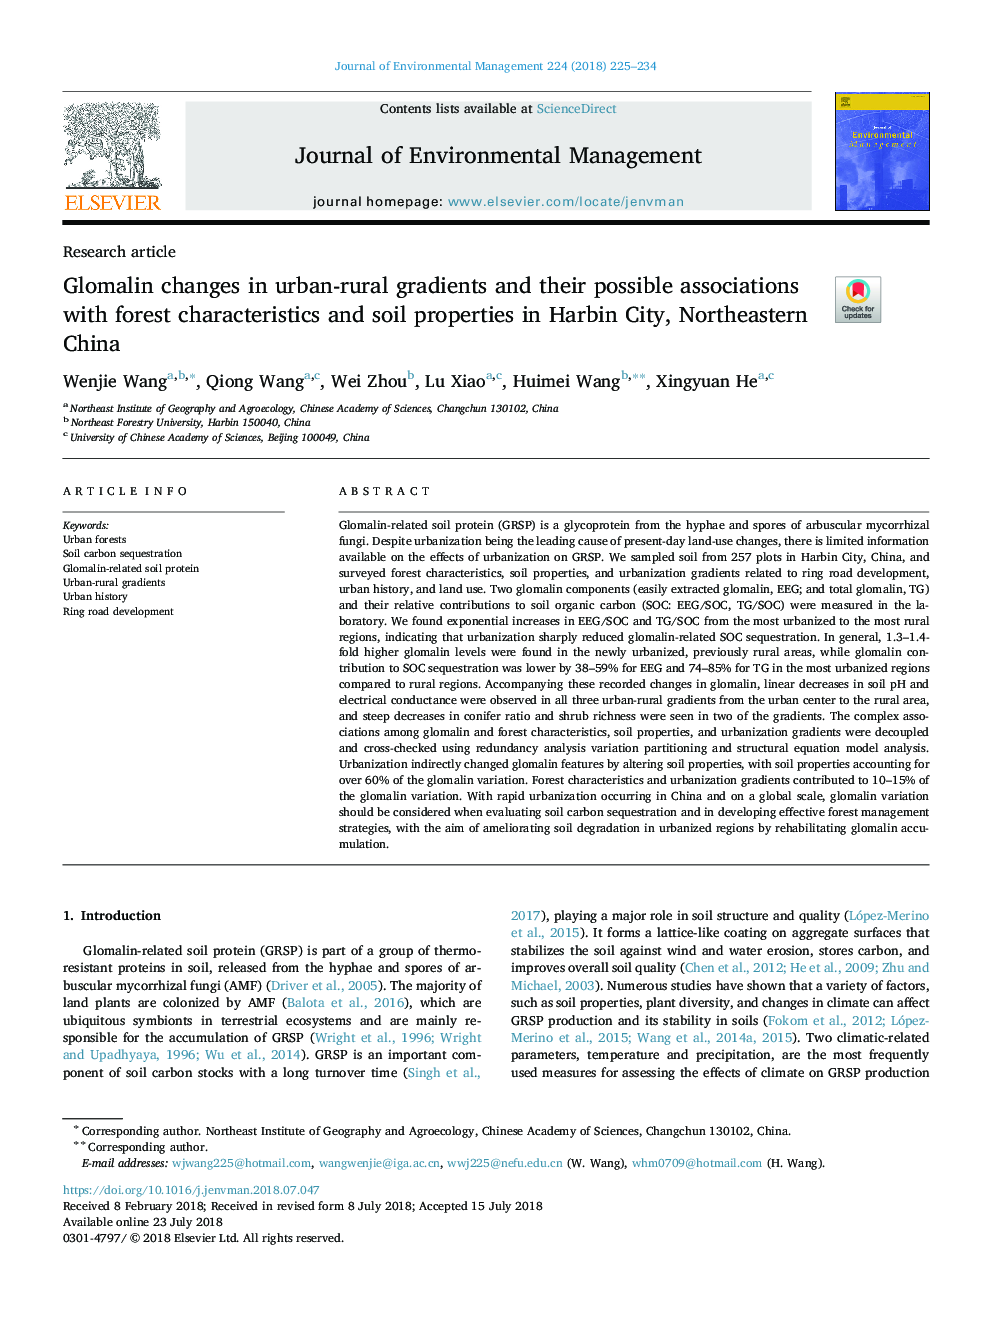 Glomalin changes in urban-rural gradients and their possible associations with forest characteristics and soil properties in Harbin City, Northeastern China